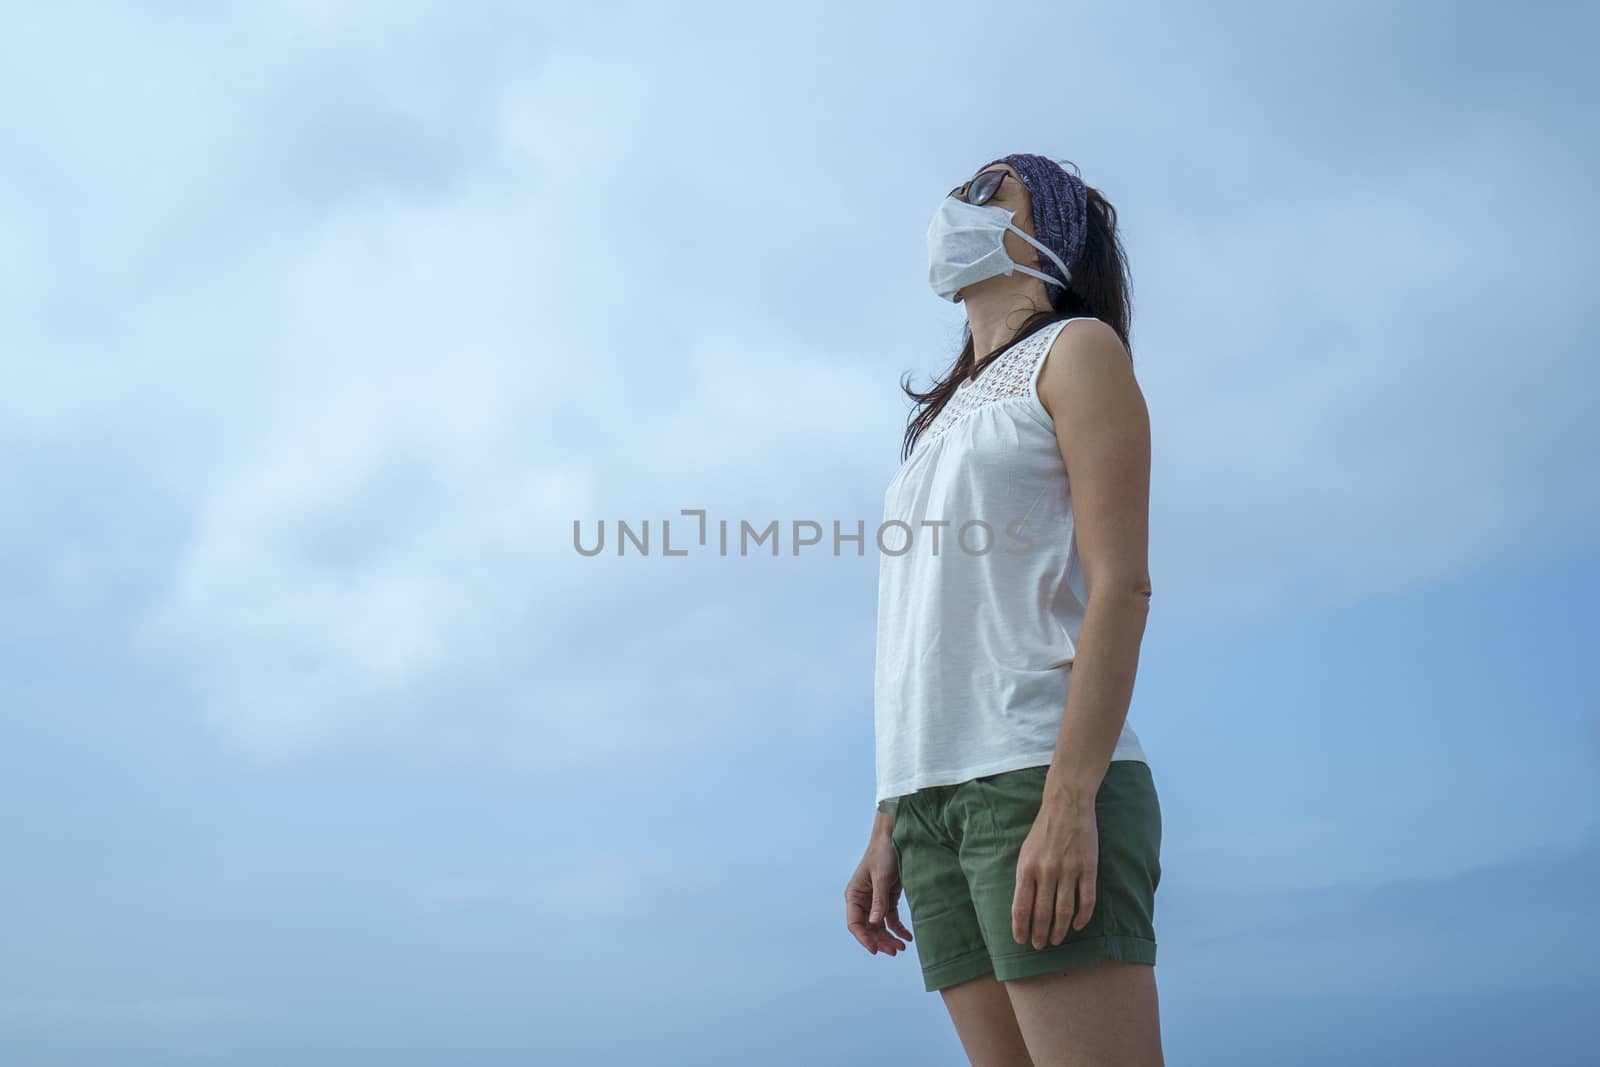 Coronavirus seaside holidays: shot of a woman at the beach looking at the sun with the mask for Covid-19 pandemic with cloudy sky by robbyfontanesi